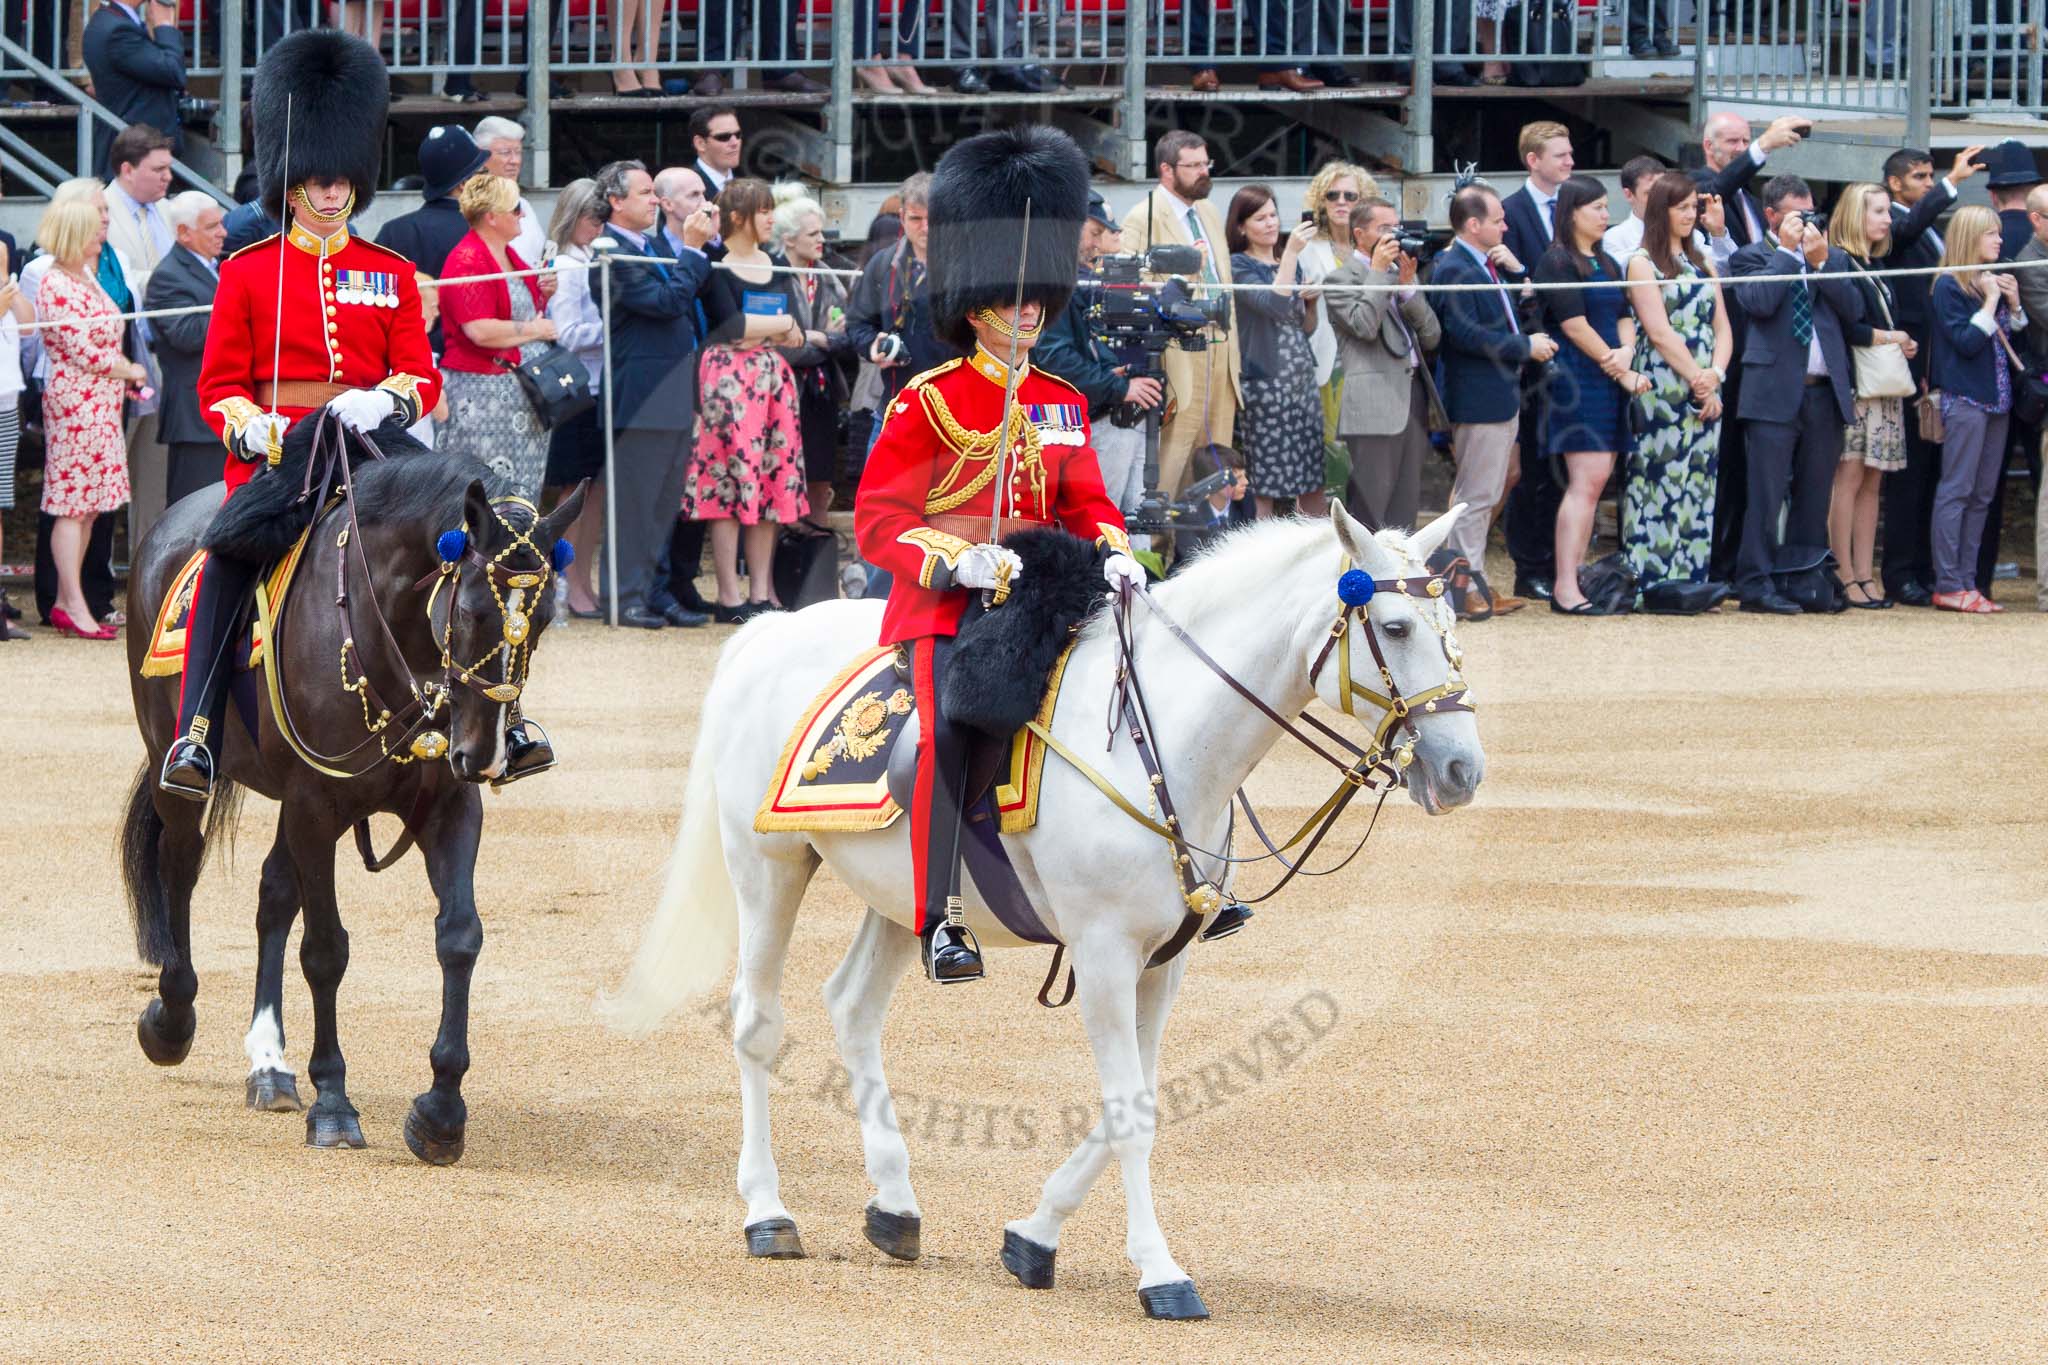 Trooping the Colour 2014.
Horse Guards Parade, Westminster,
London SW1A,

United Kingdom,
on 14 June 2014 at 11:35, image #610